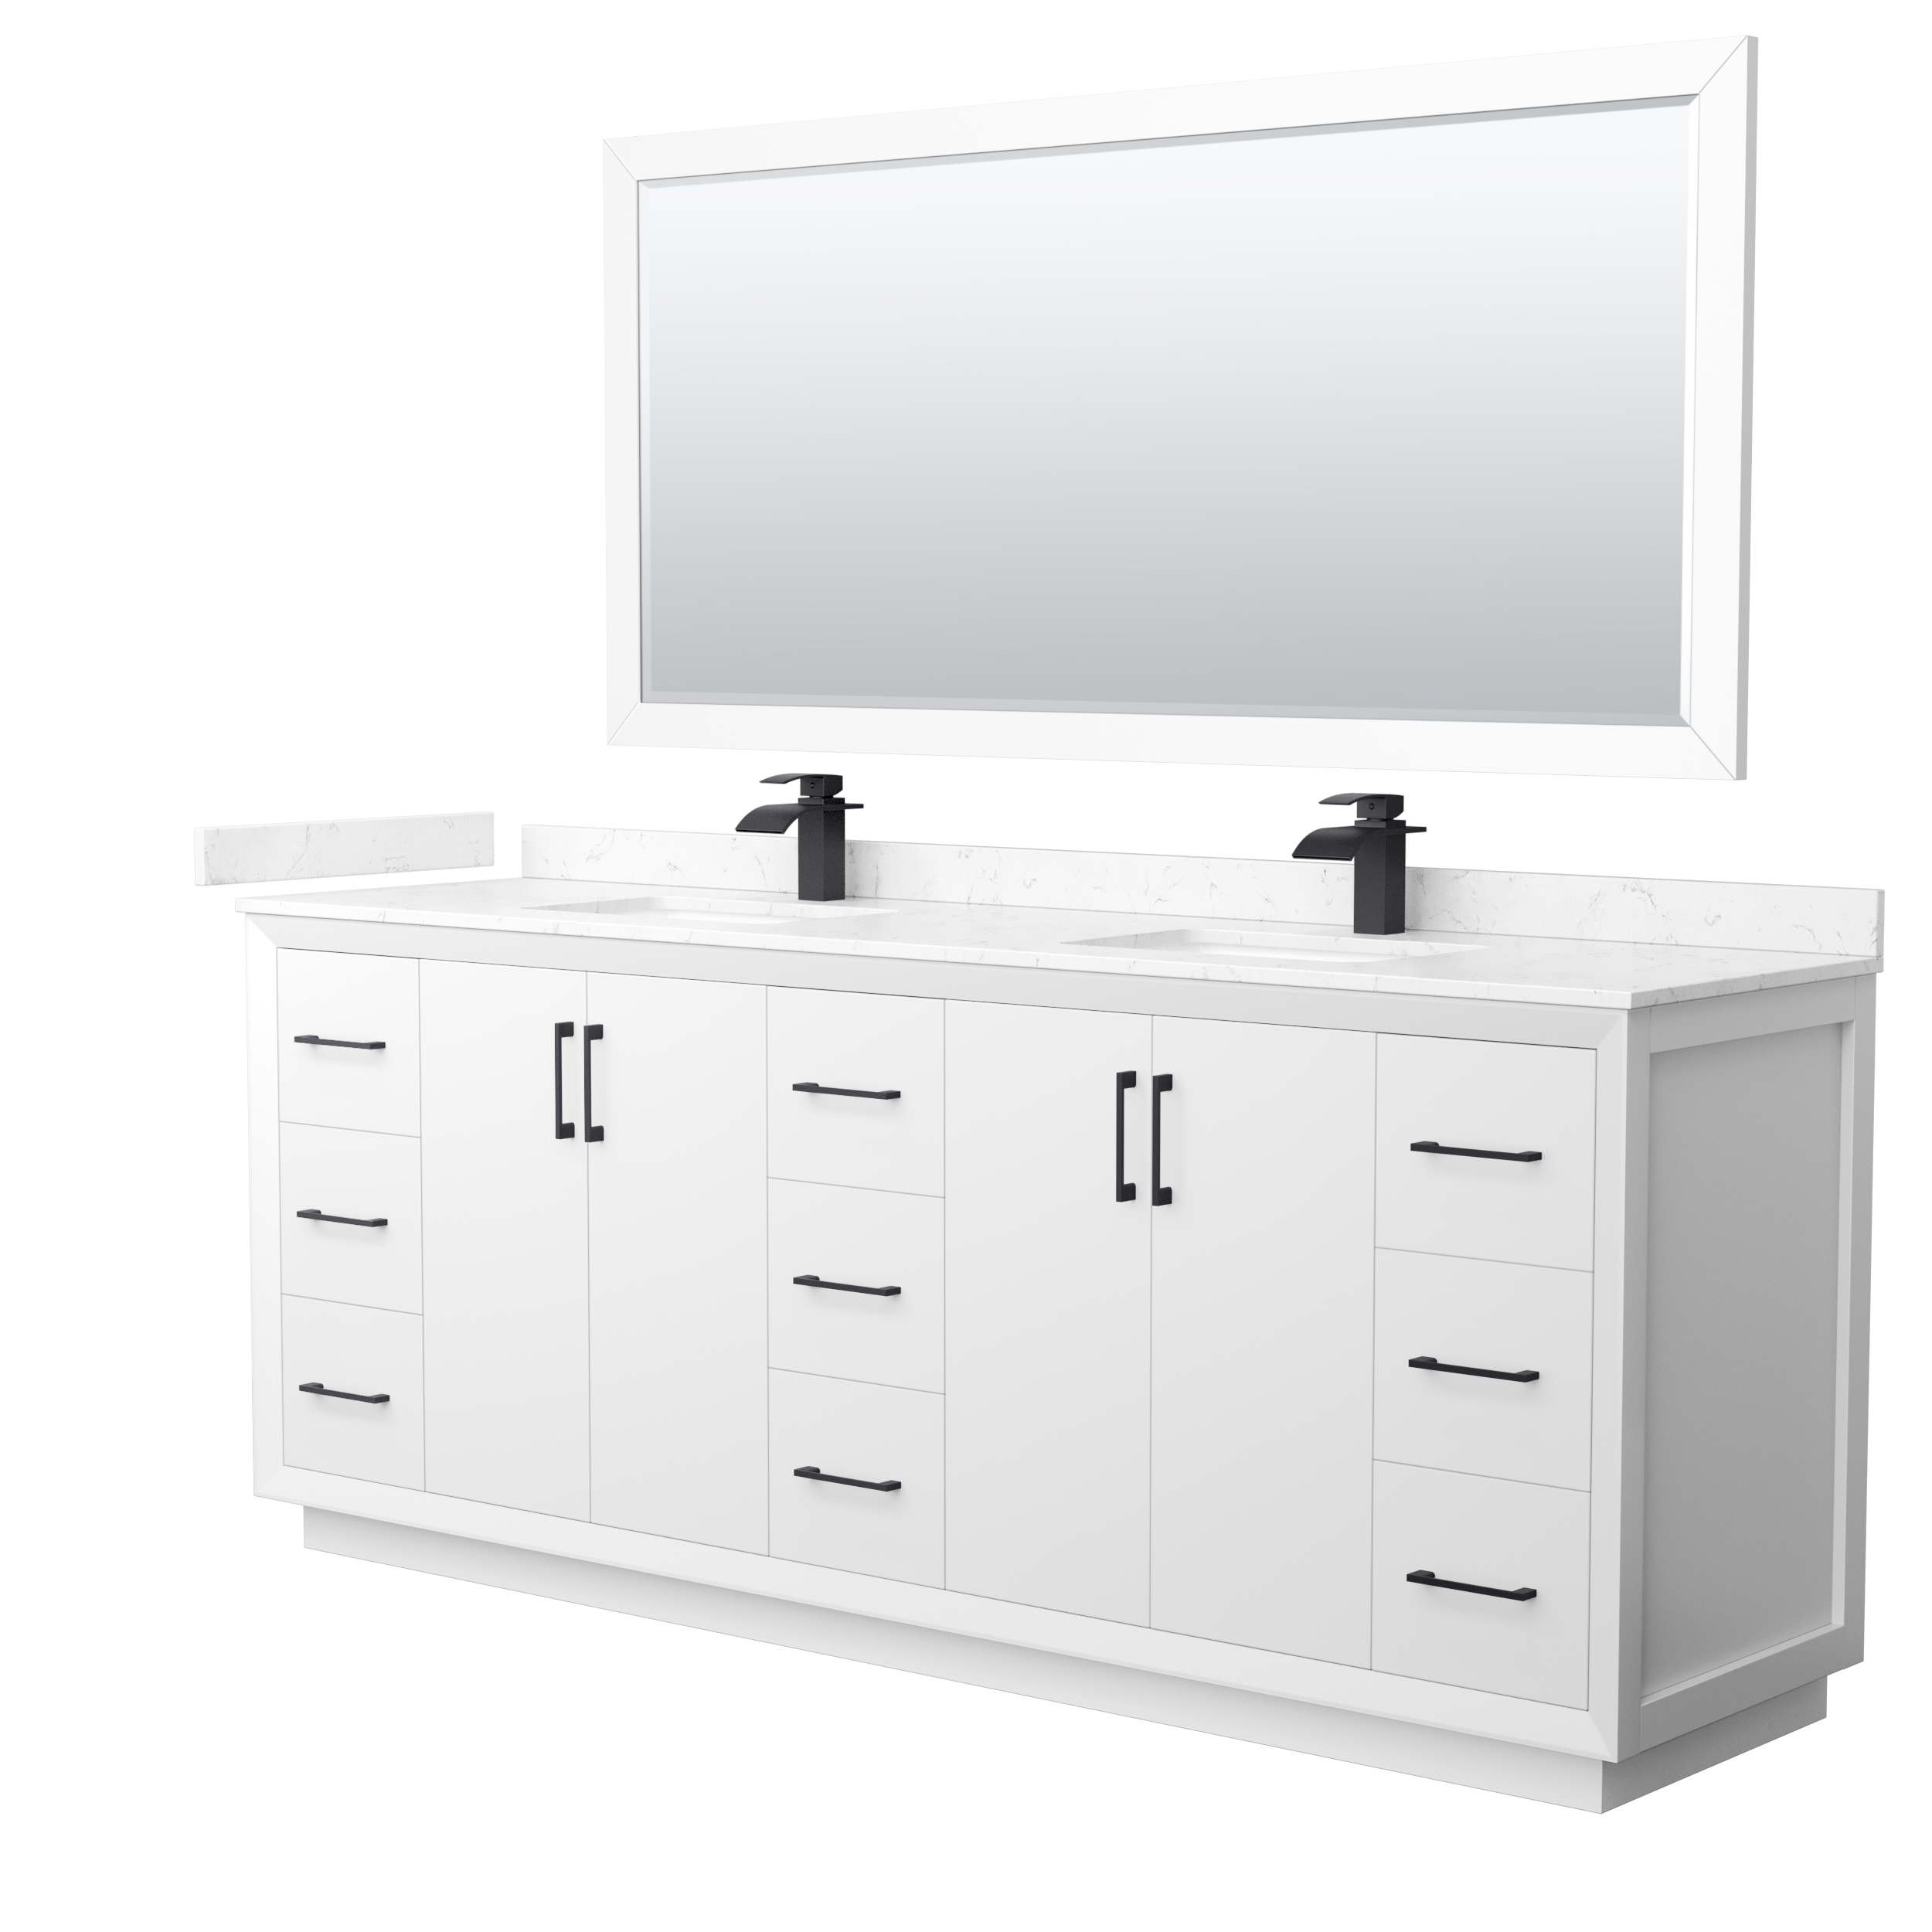 84" Transitional Double Vanity Base in White, 3 Top Option, with 3 Hardware Options and Mirror Option